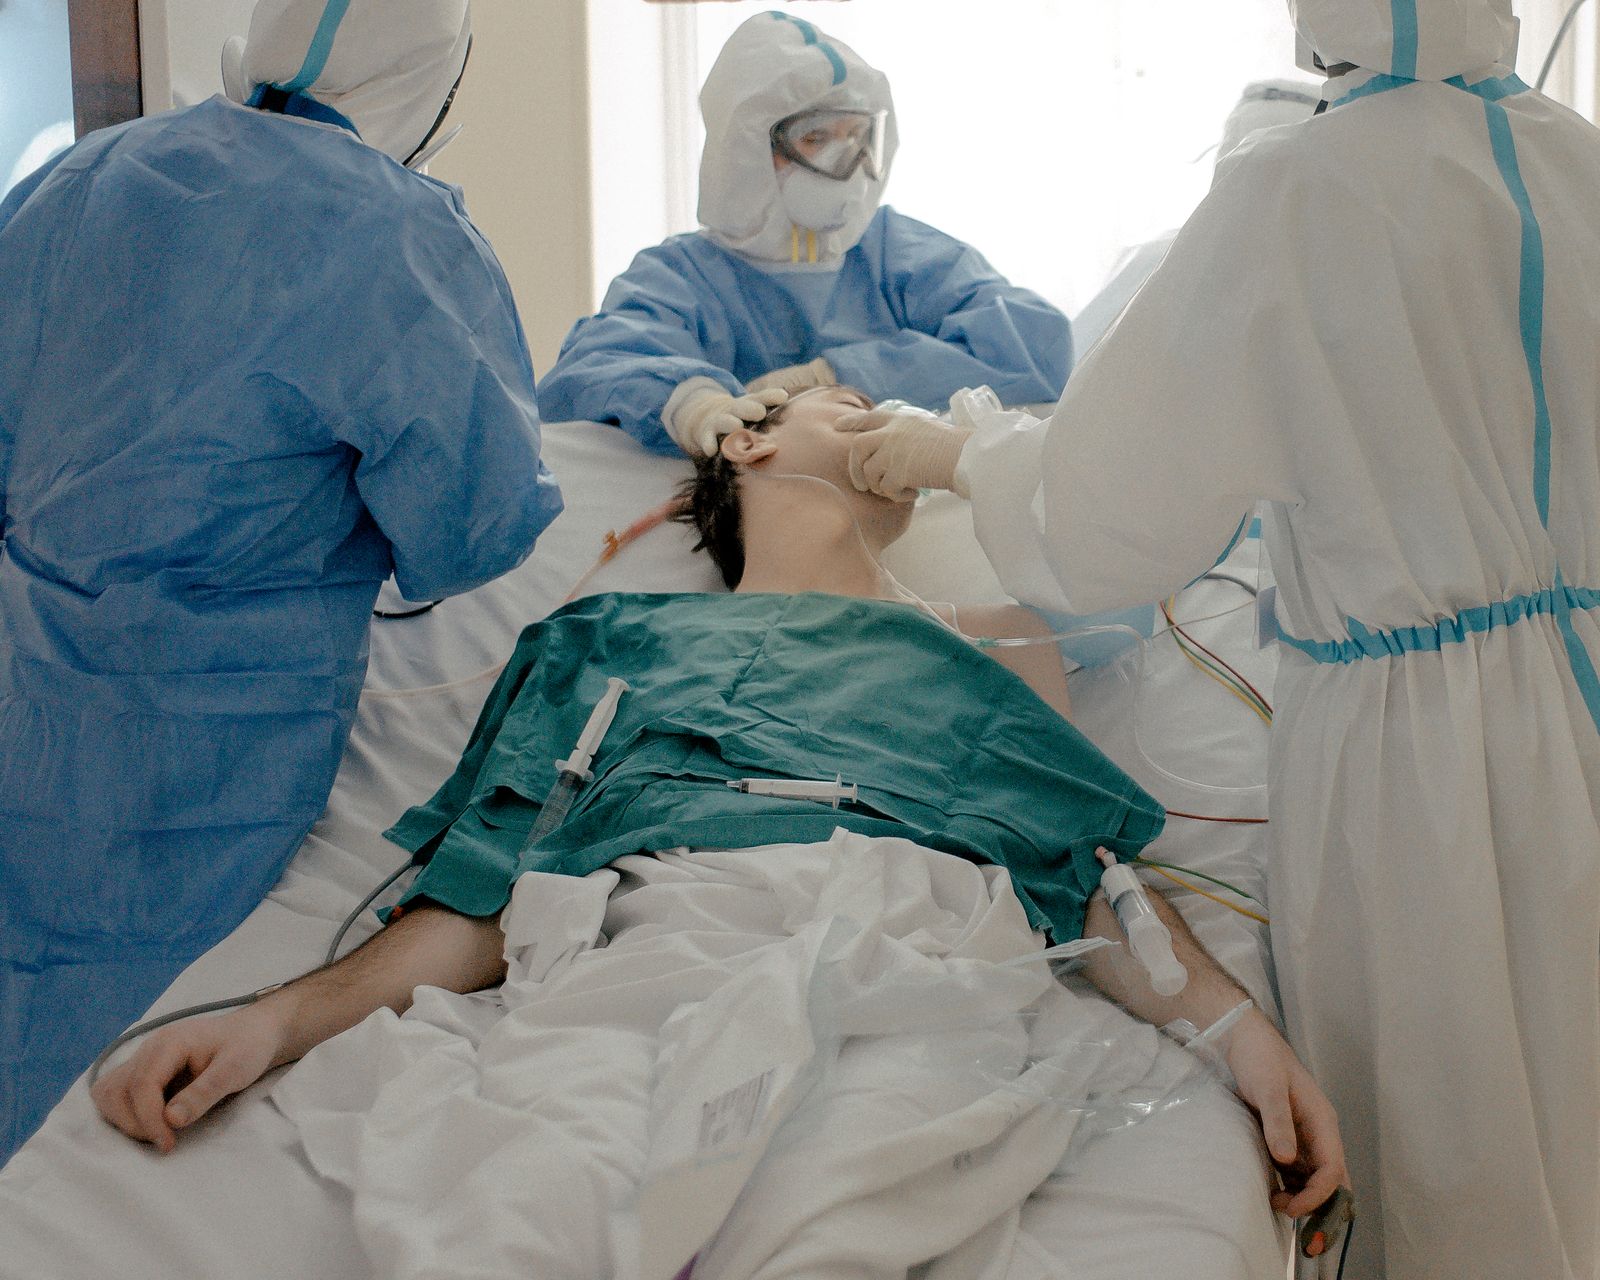 © Nanna Heitmann - Image from the Inside Russia’s surreal battle against the pandemic photography project